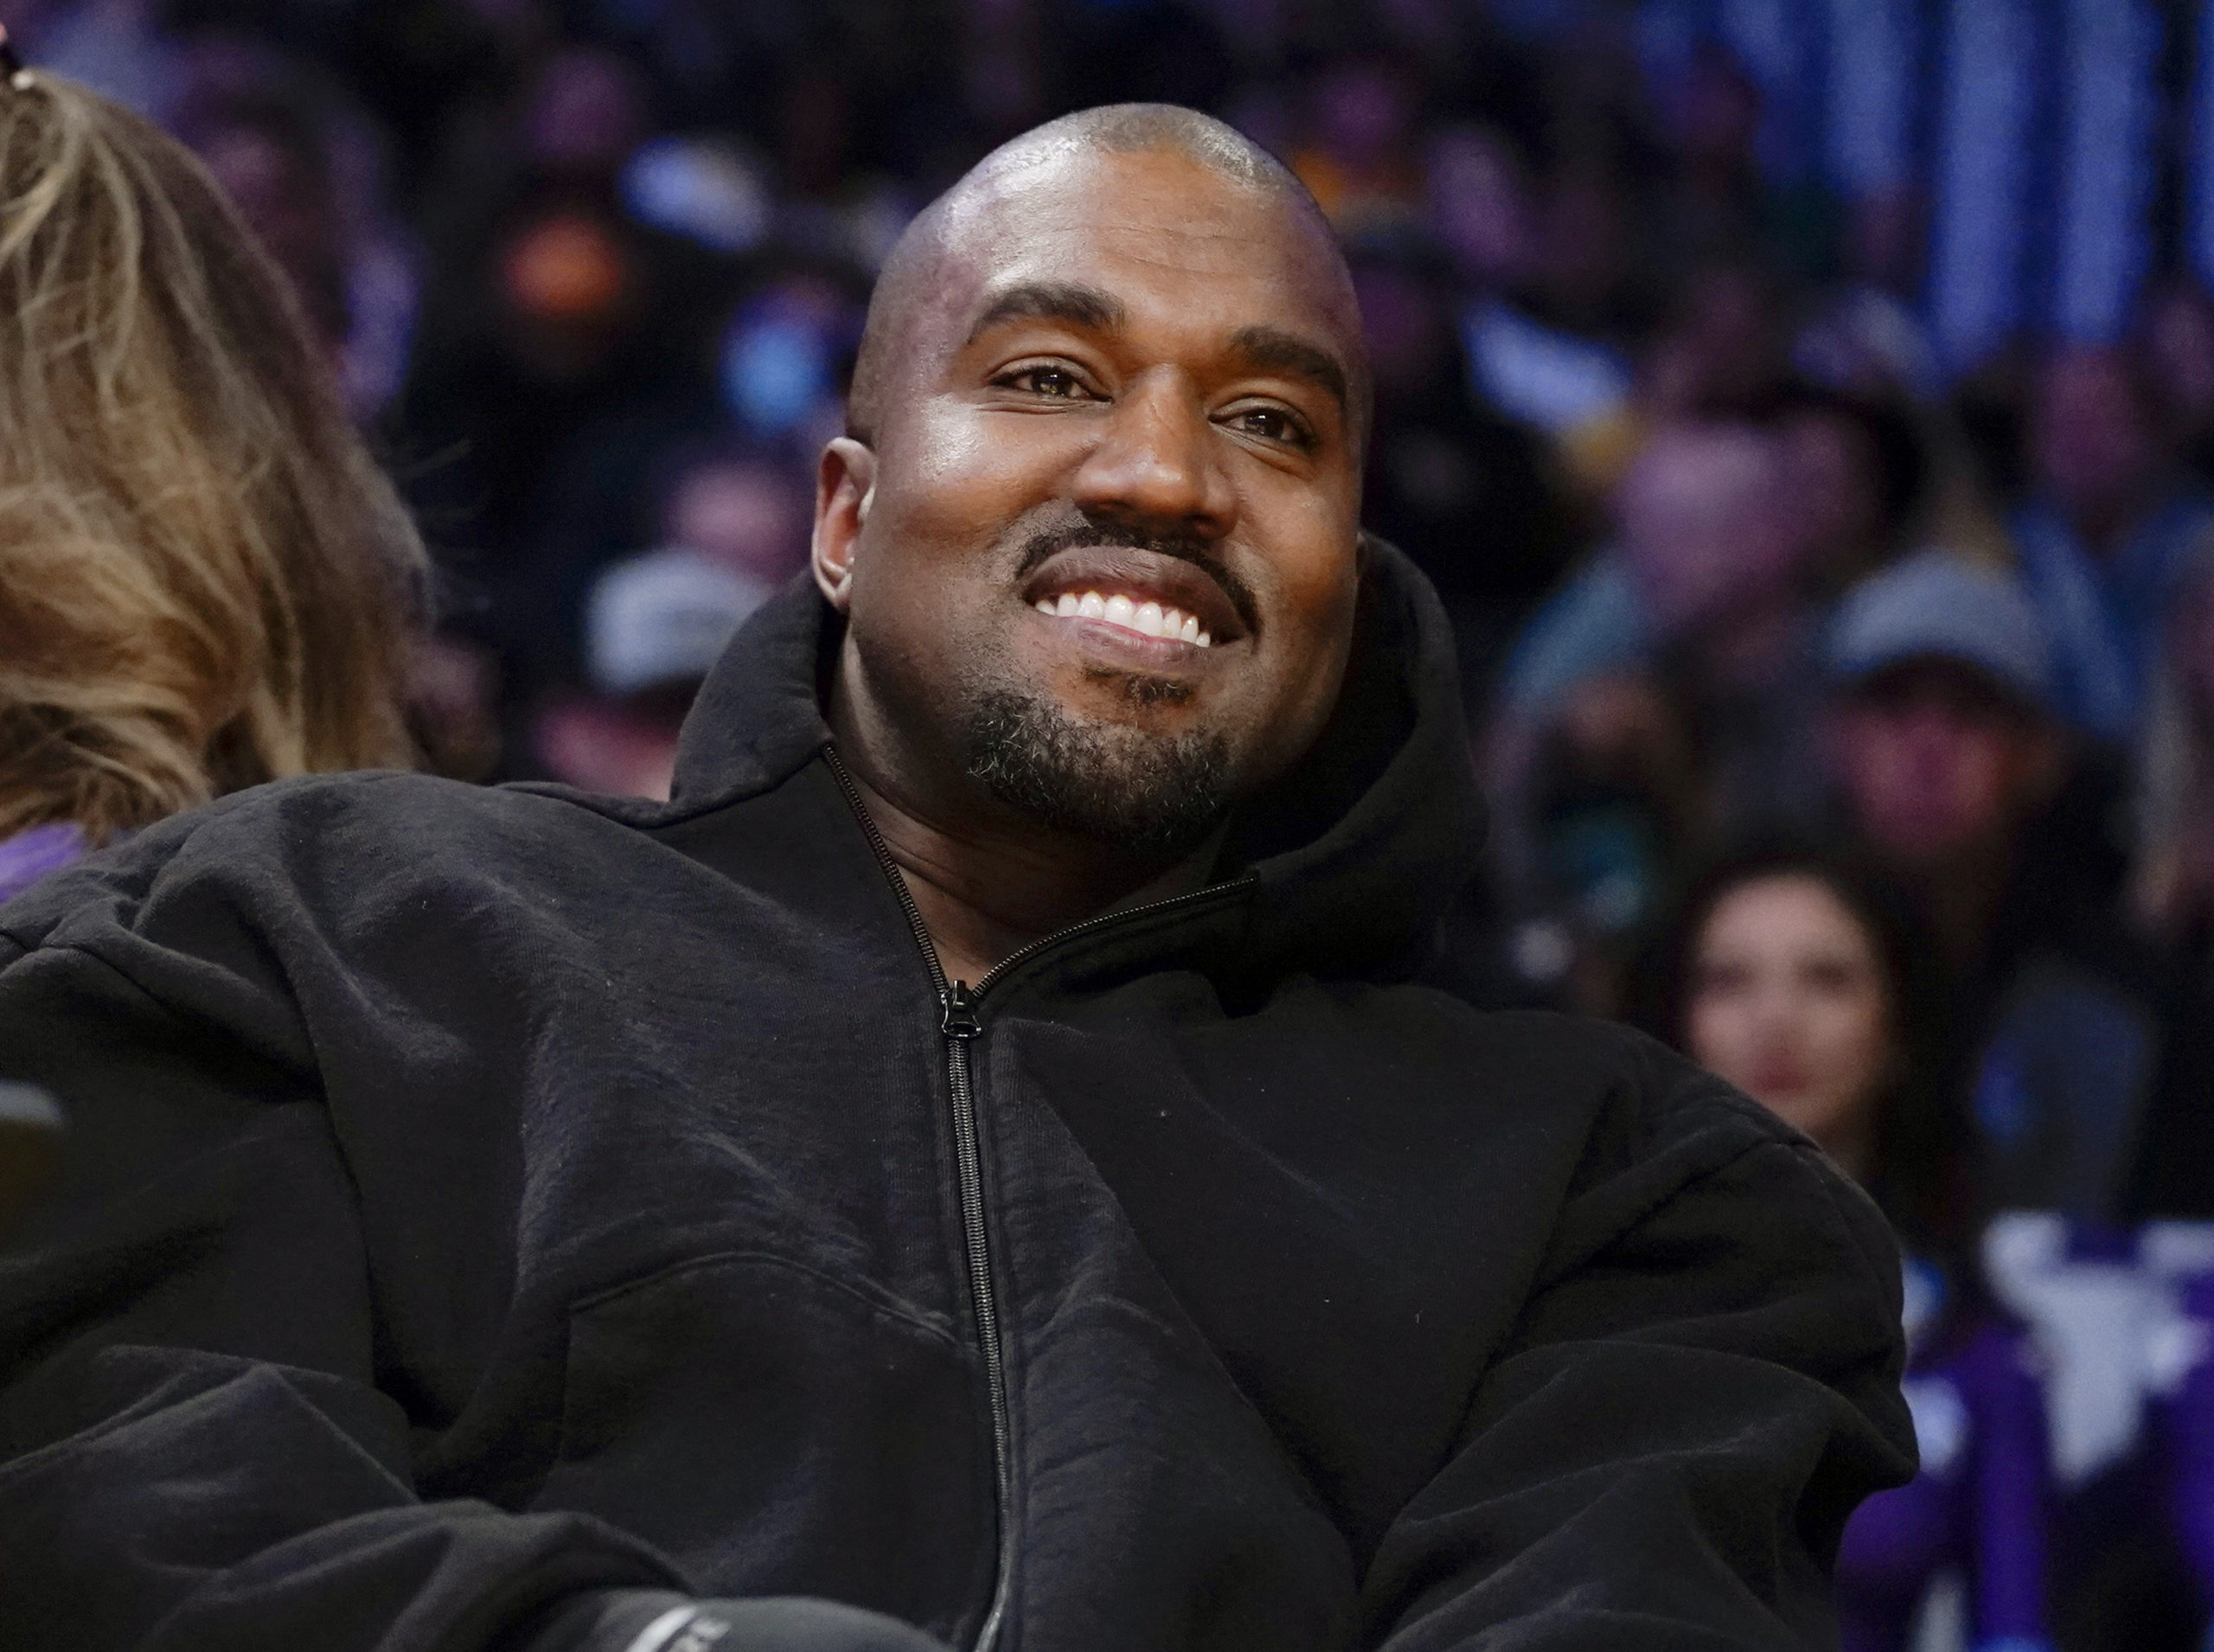 Adidas has ended its partnership with the rapper formerly known as Kanye West, seen in a file photo from March, over his offensive and antisemitic remarks.